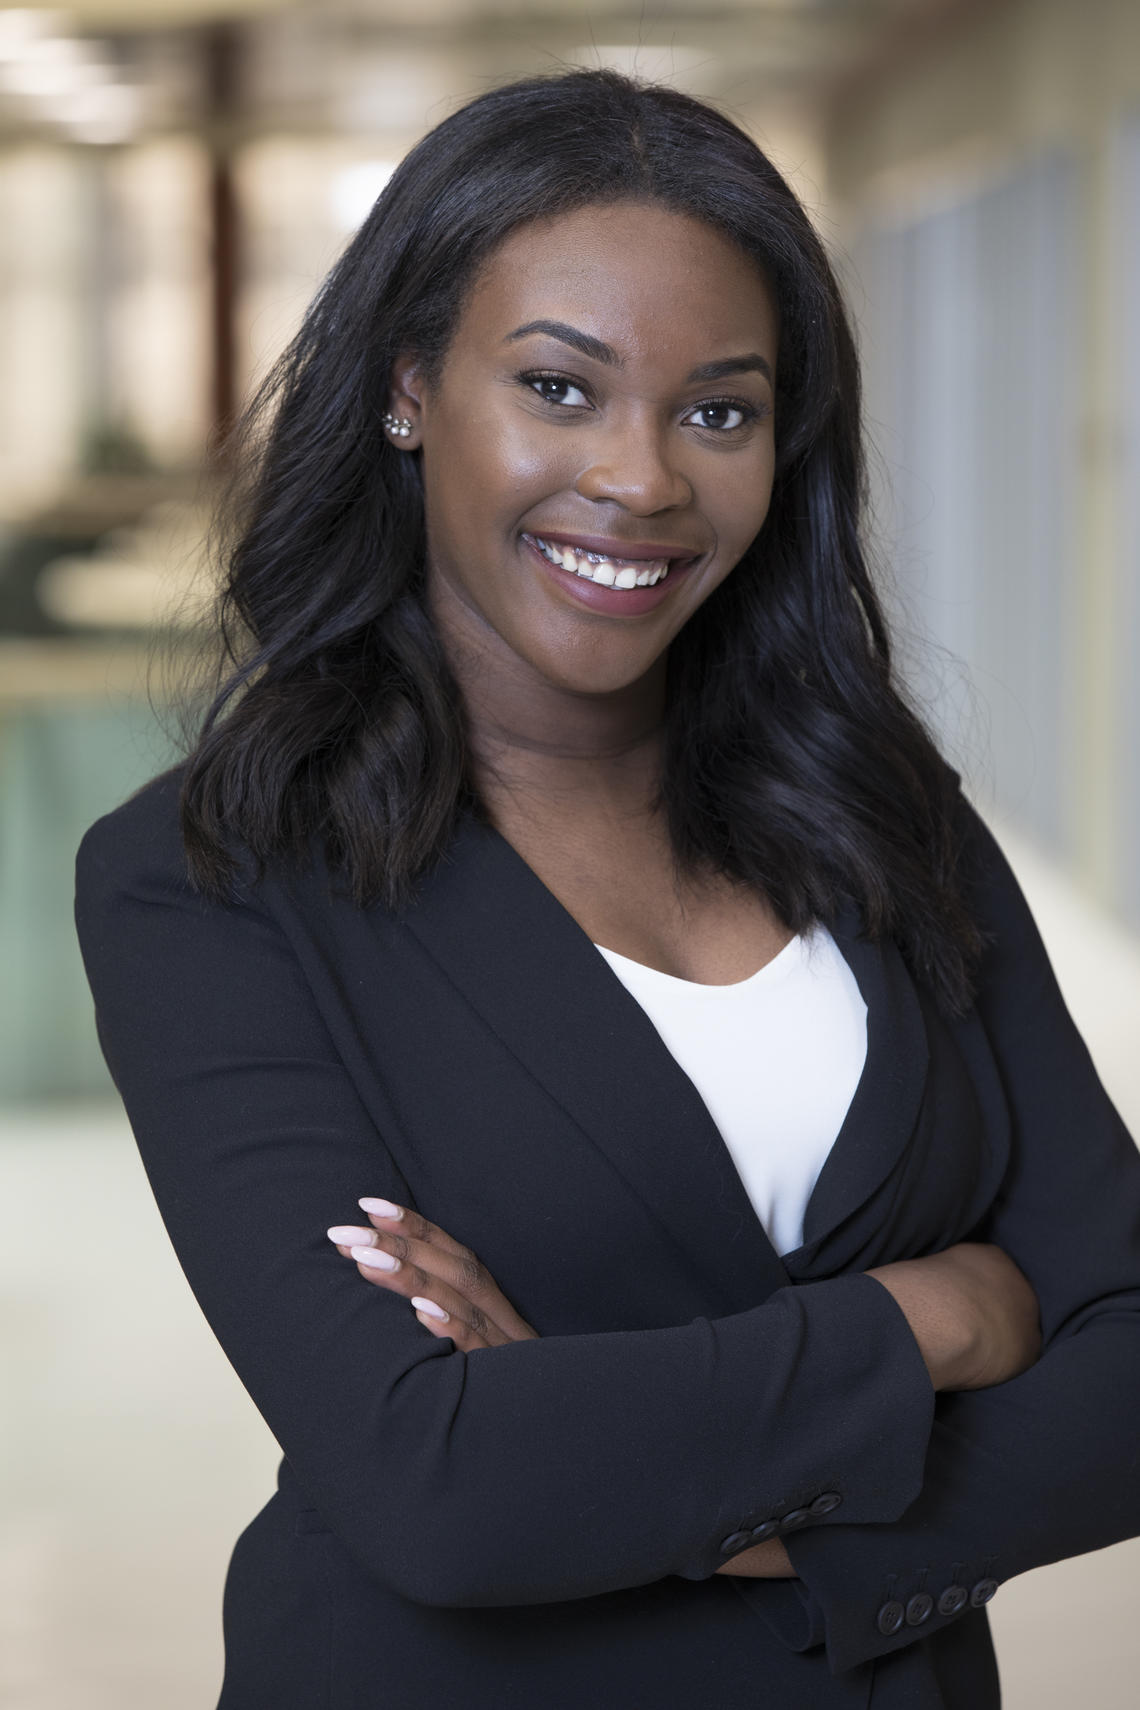 Chidera Nwaroh, MSc student in medical science at the University of Calgary, is competing with her talk, A Virtual Biopsy: Detecting Metabolite Changes in the Brain.